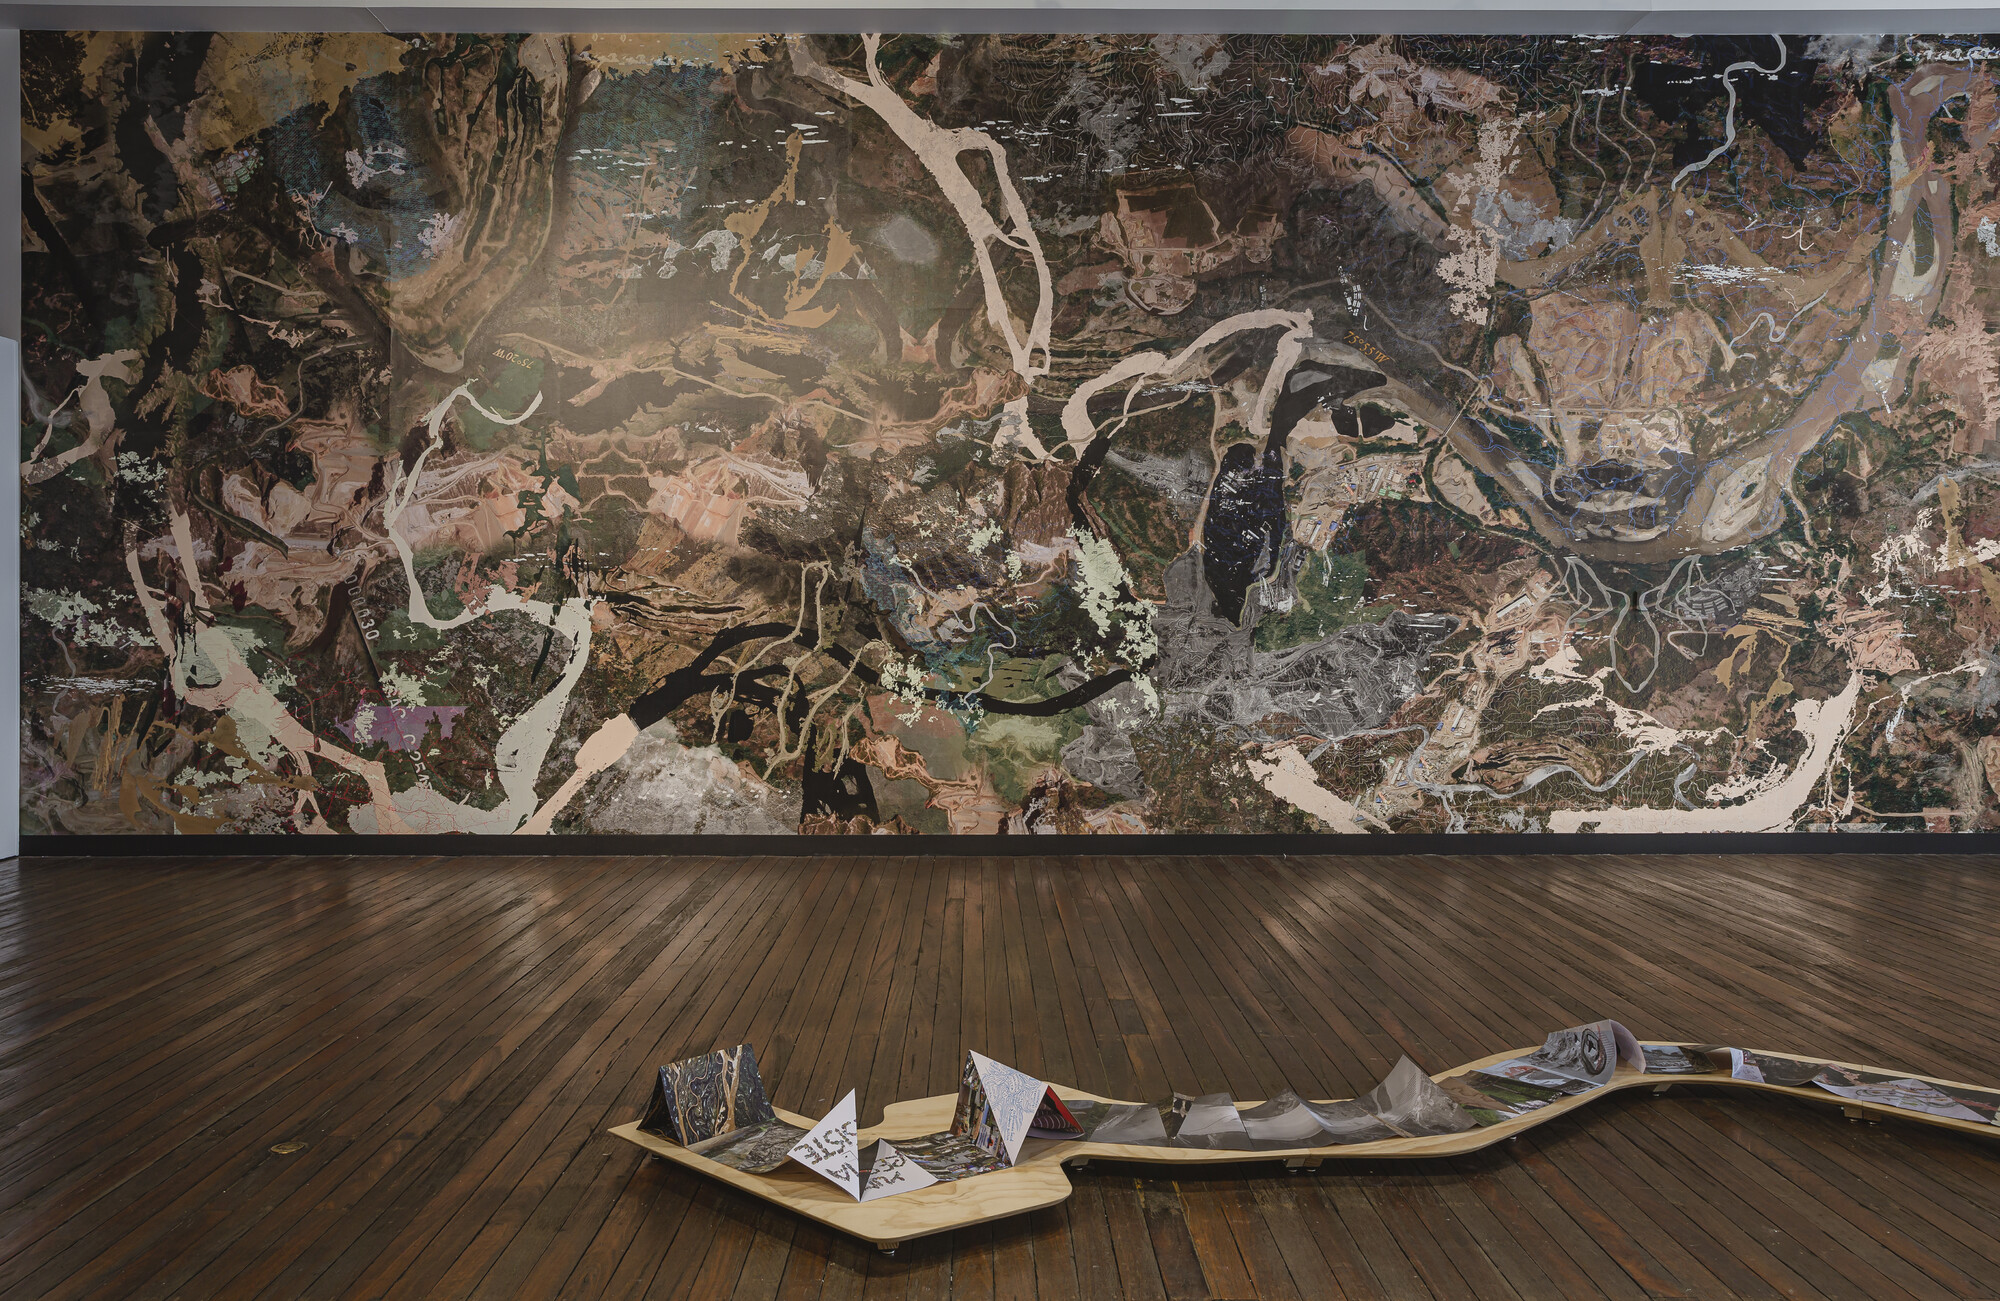 Foreground: Carolina Caycedo, Serpent River Book and Serpent Table, 2017 (detail). Background: Yuma, or the Land of Friends, 2021. Courtesy the artist. Presentation at the 23rd Biennale of Sydney was made possible with generous assistance from the UK/Australia Season Patrons Board, the British Council and the Australian Government as part of the UK/Australia Season. Installation view, 23rd Biennale of Sydney, rīvus, 2022, National Art School. Photography: Document Photography.